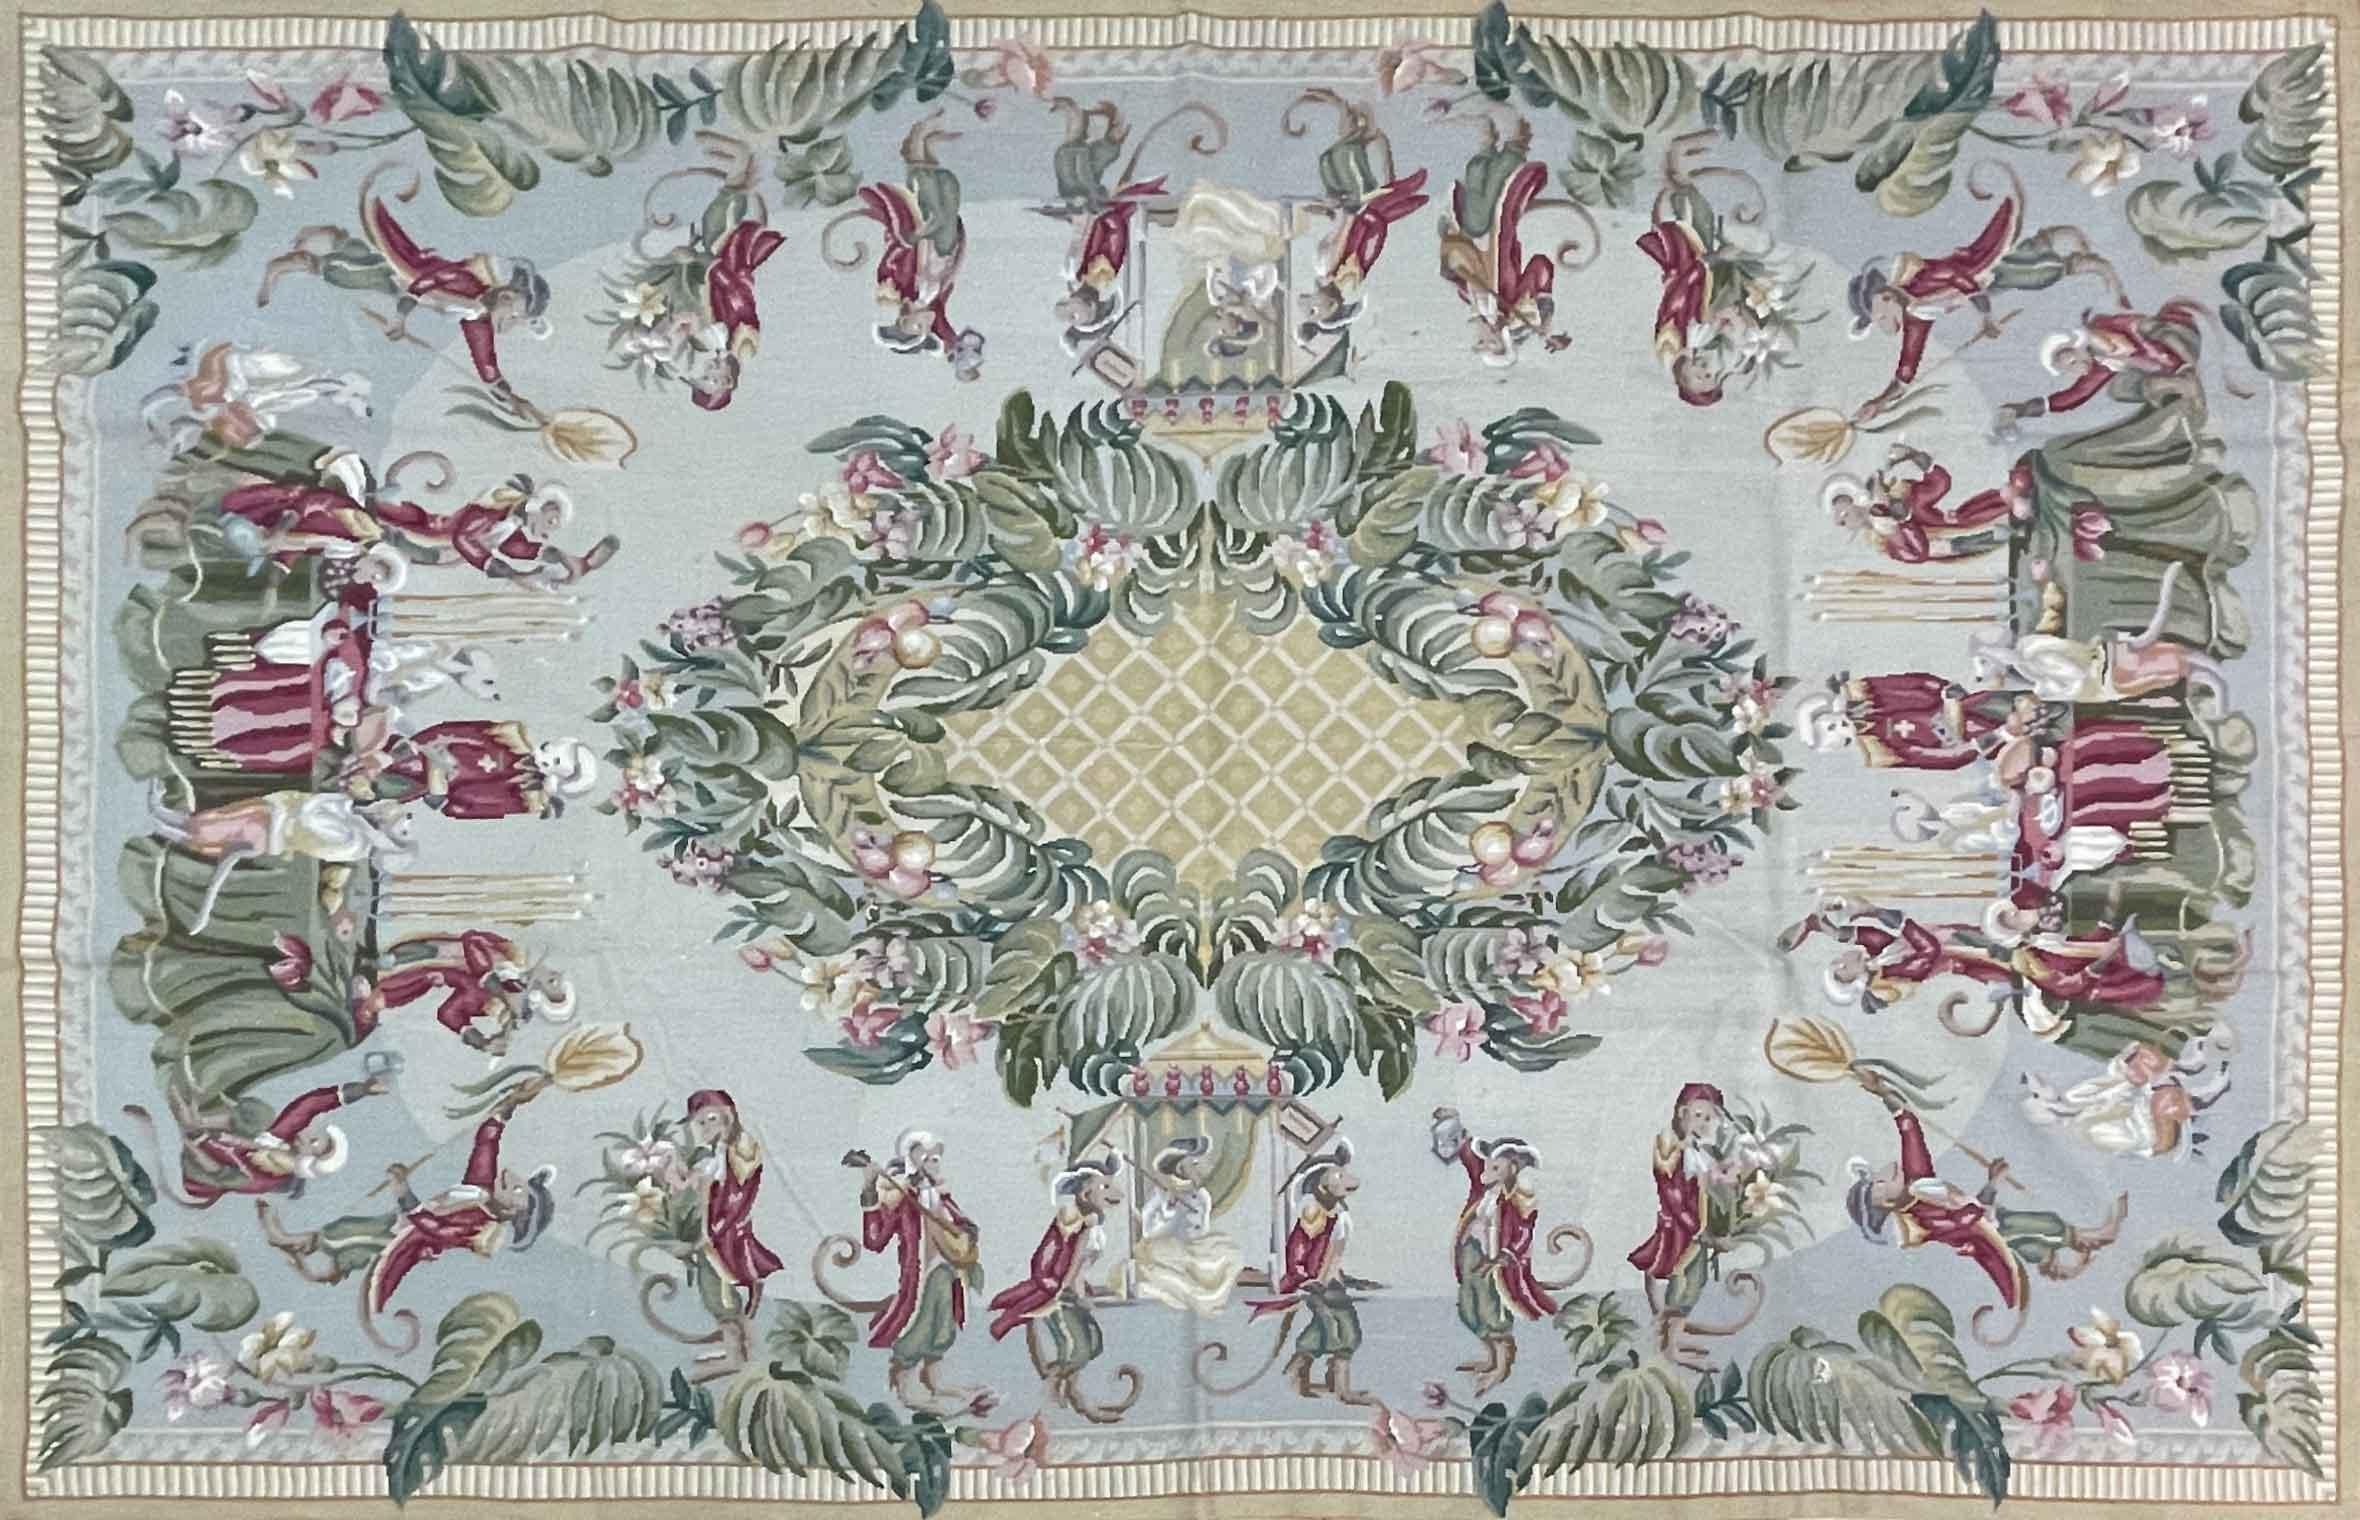 Beautiful vintage French style needlepoint wool rug with a muted green  field. A gorgeous floral pattern Aubusson design.

This rug measures 5'8